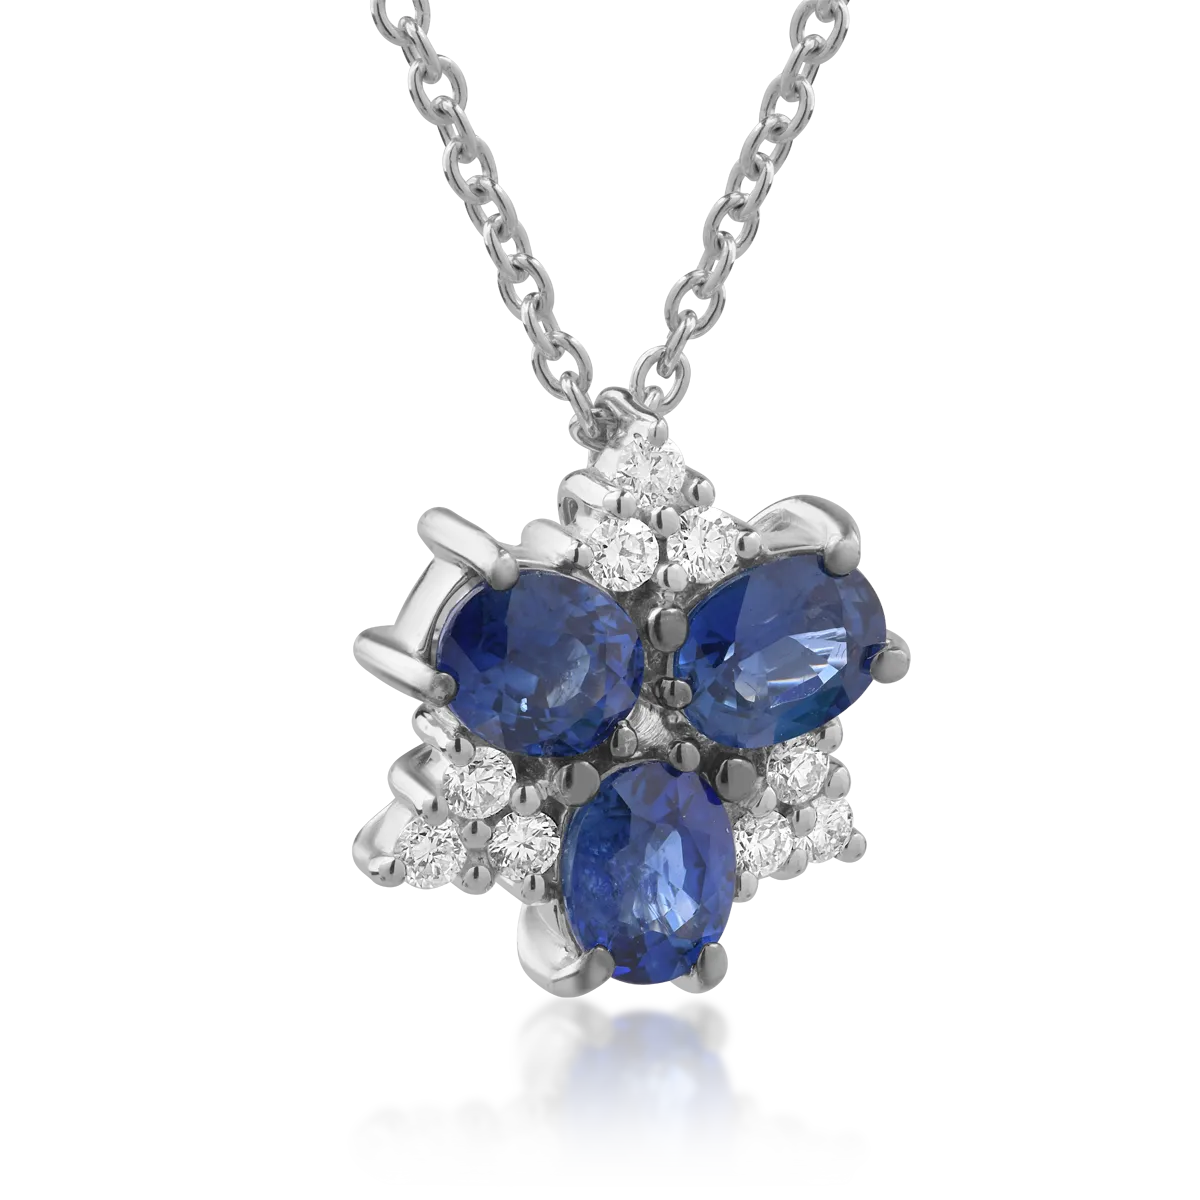 18K white gold pendant necklace with 1.65ct sapphires and 0.17ct diamonds